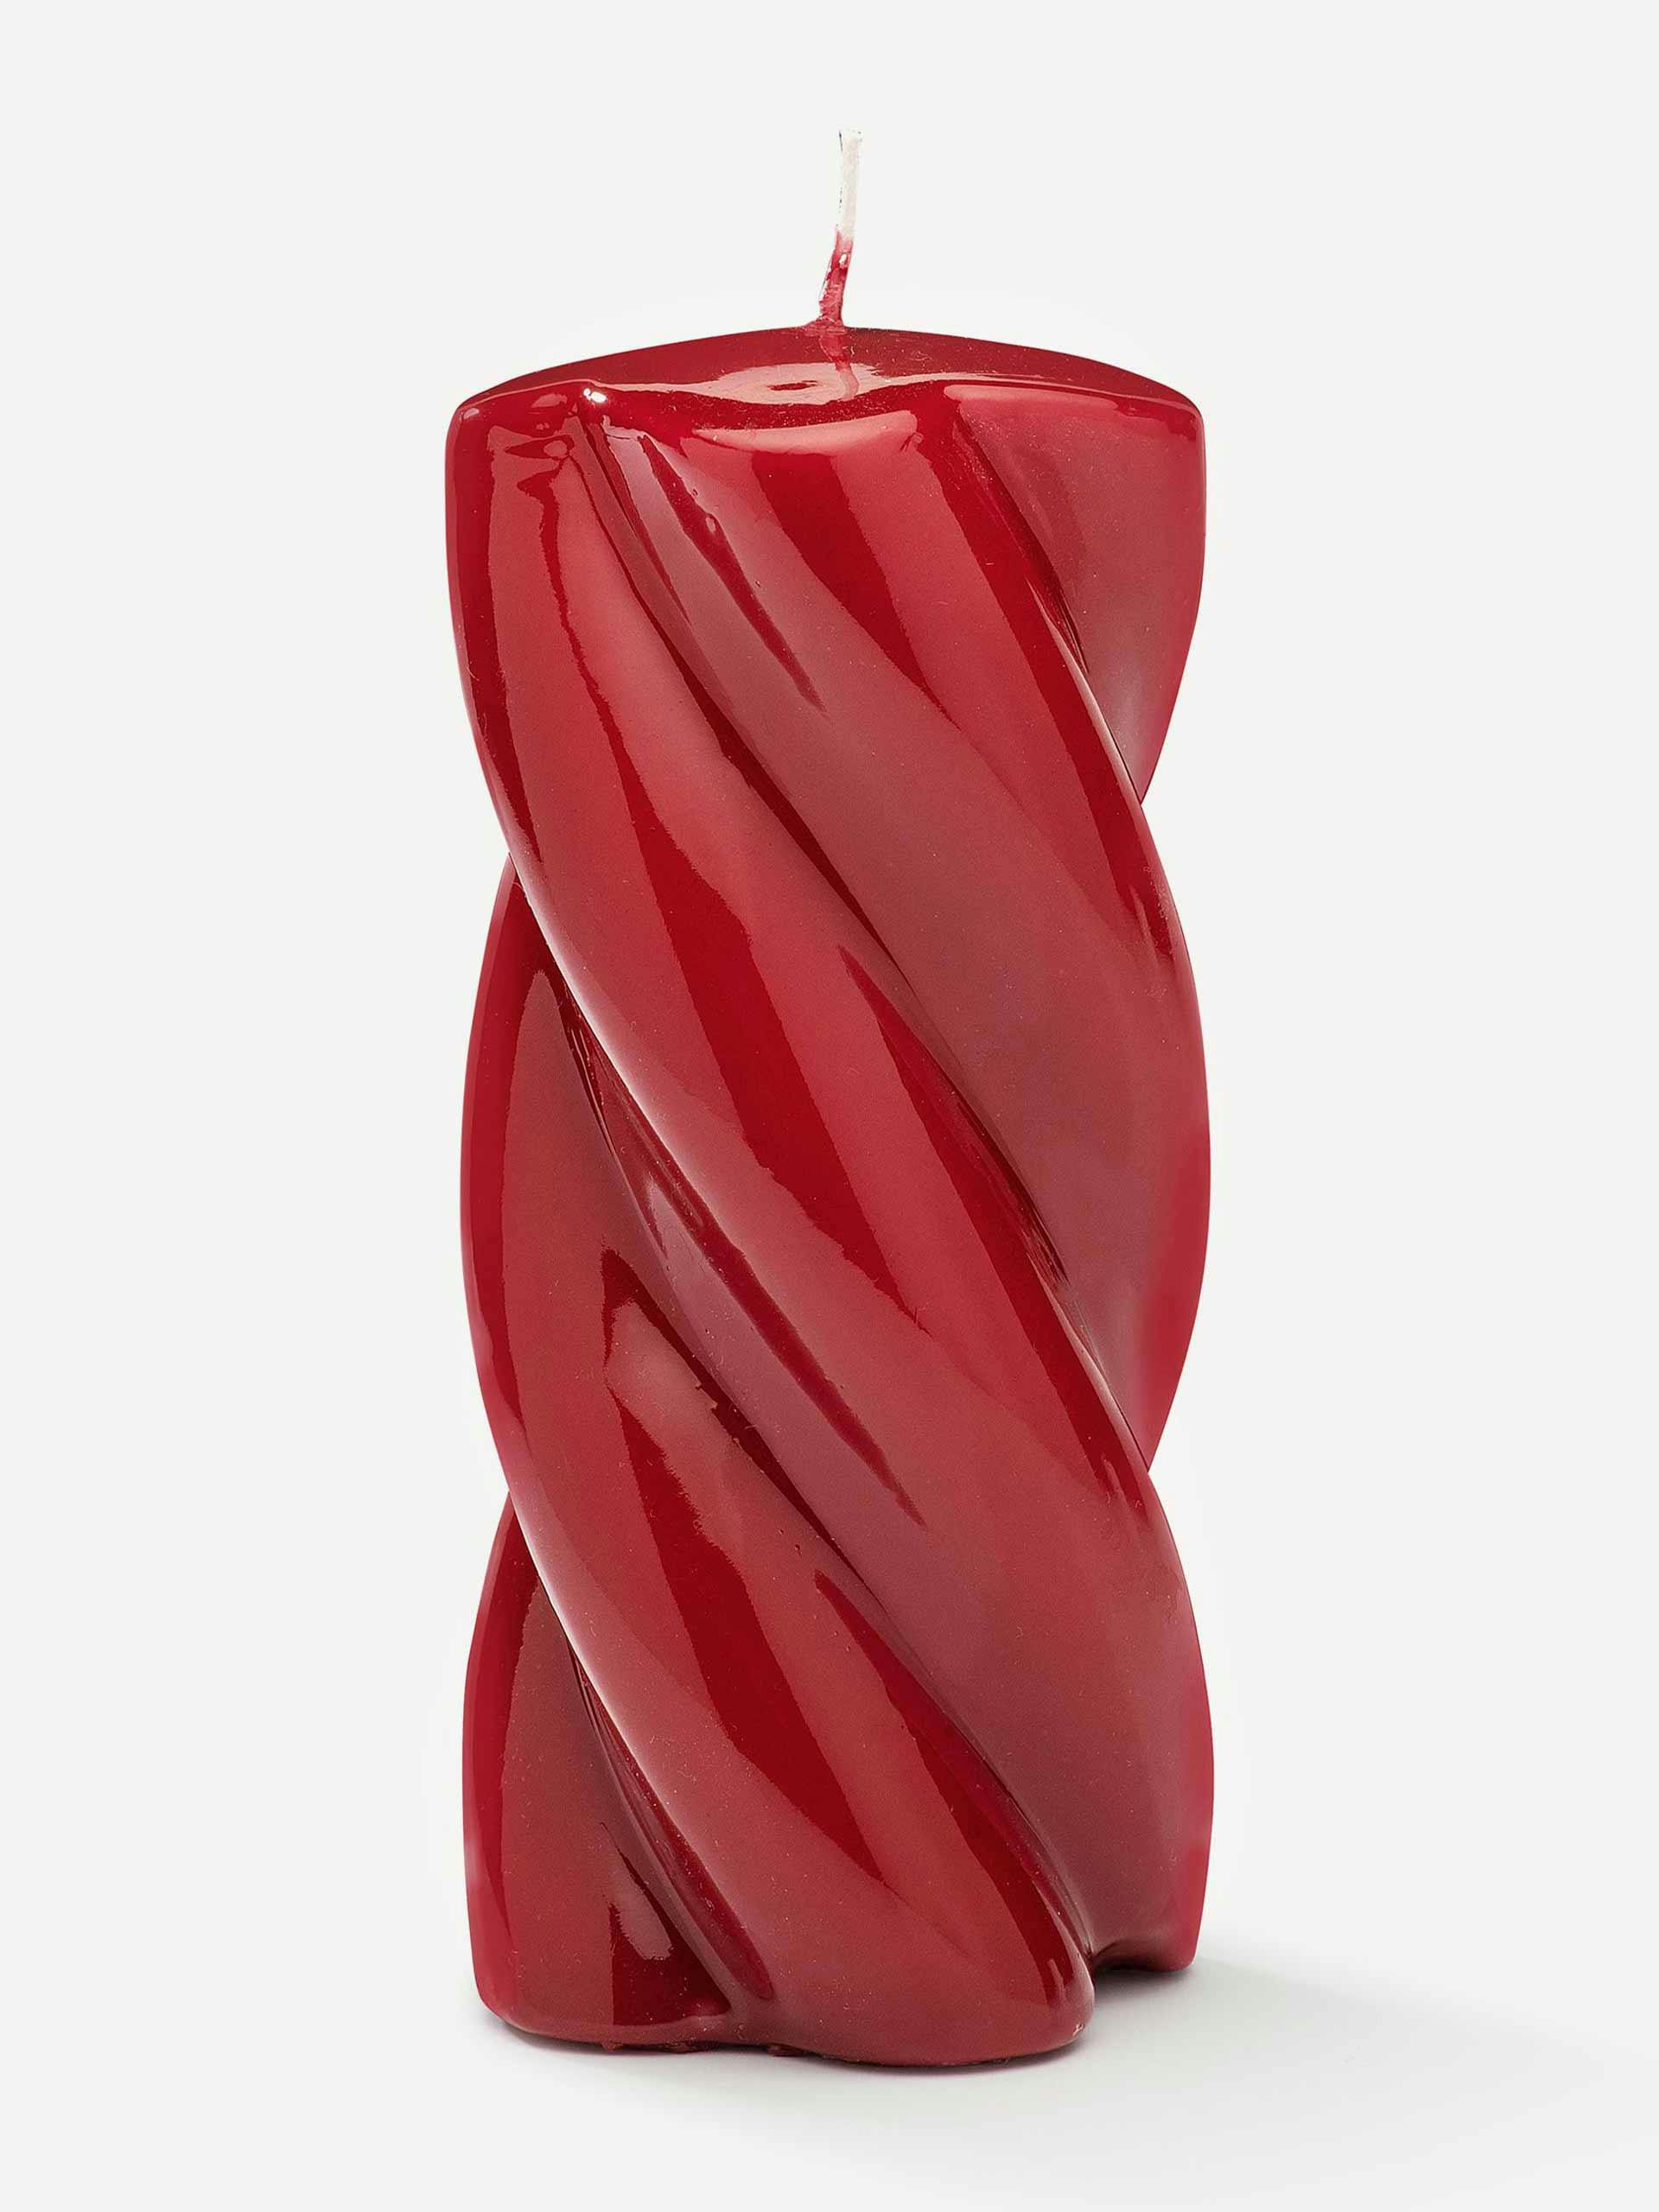 Blunt twisted candle